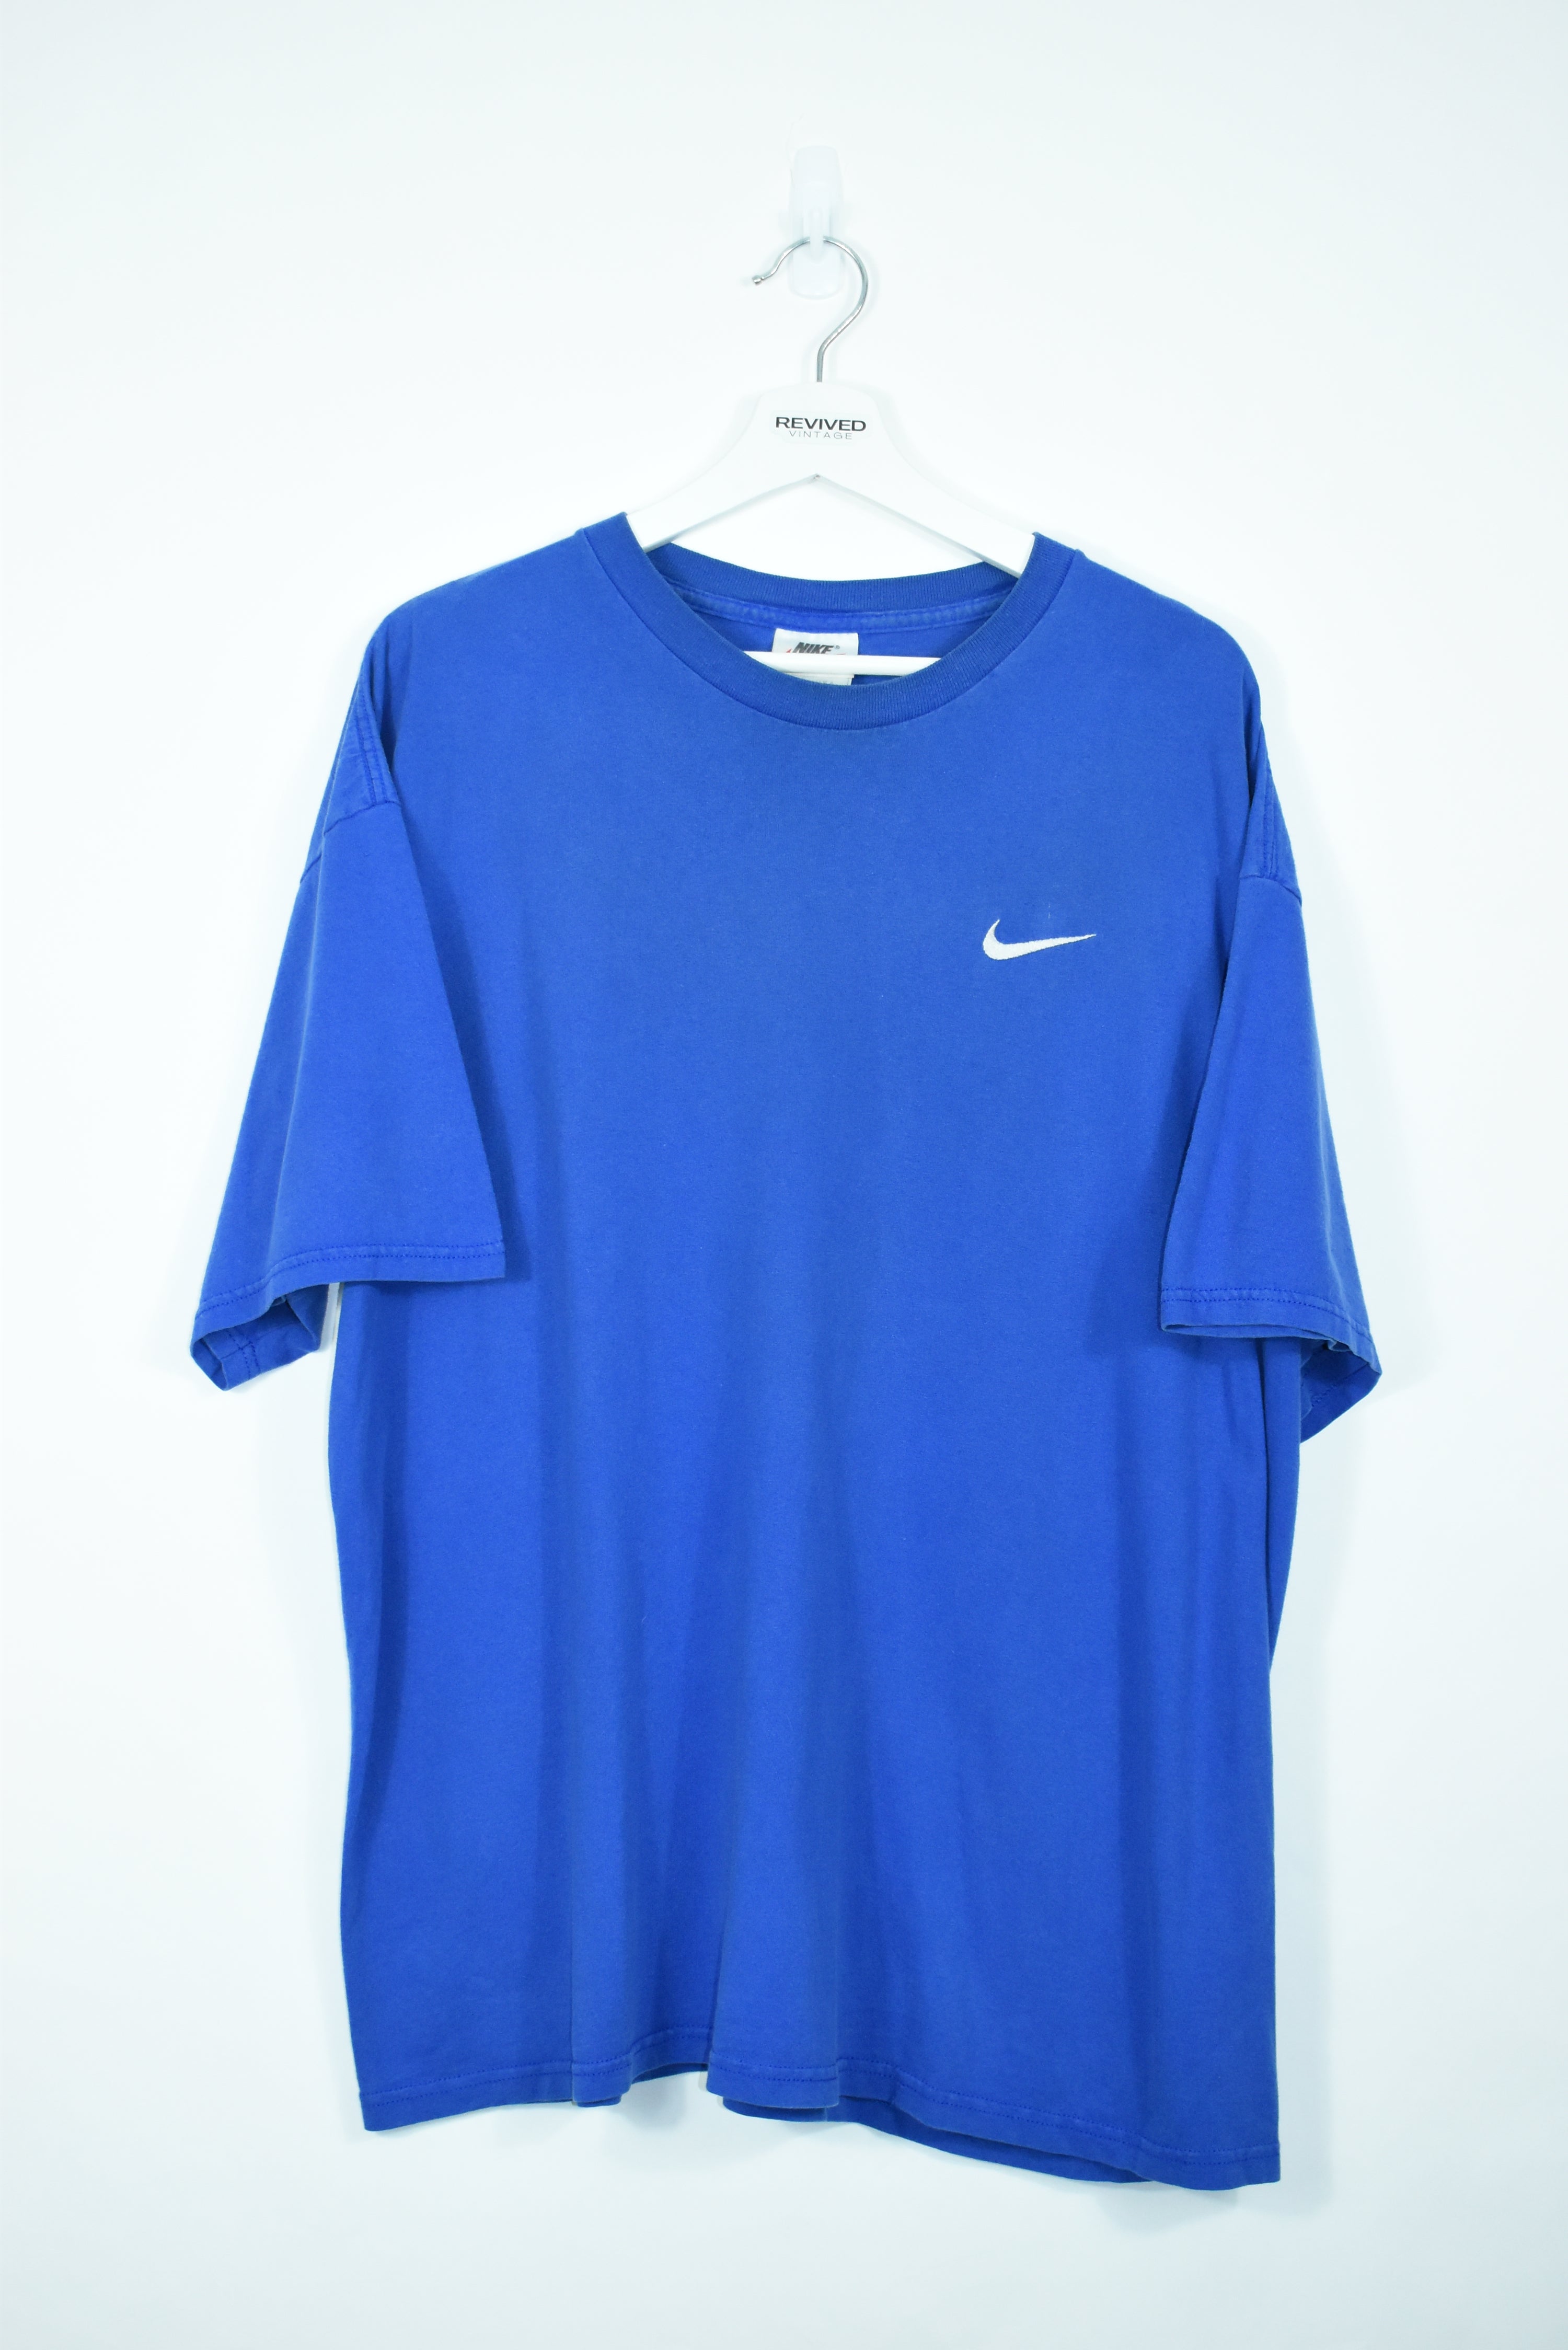 VINTAGE NIKE EMBROIDERY SMALL SWOOSH T SHIRT XLARGE